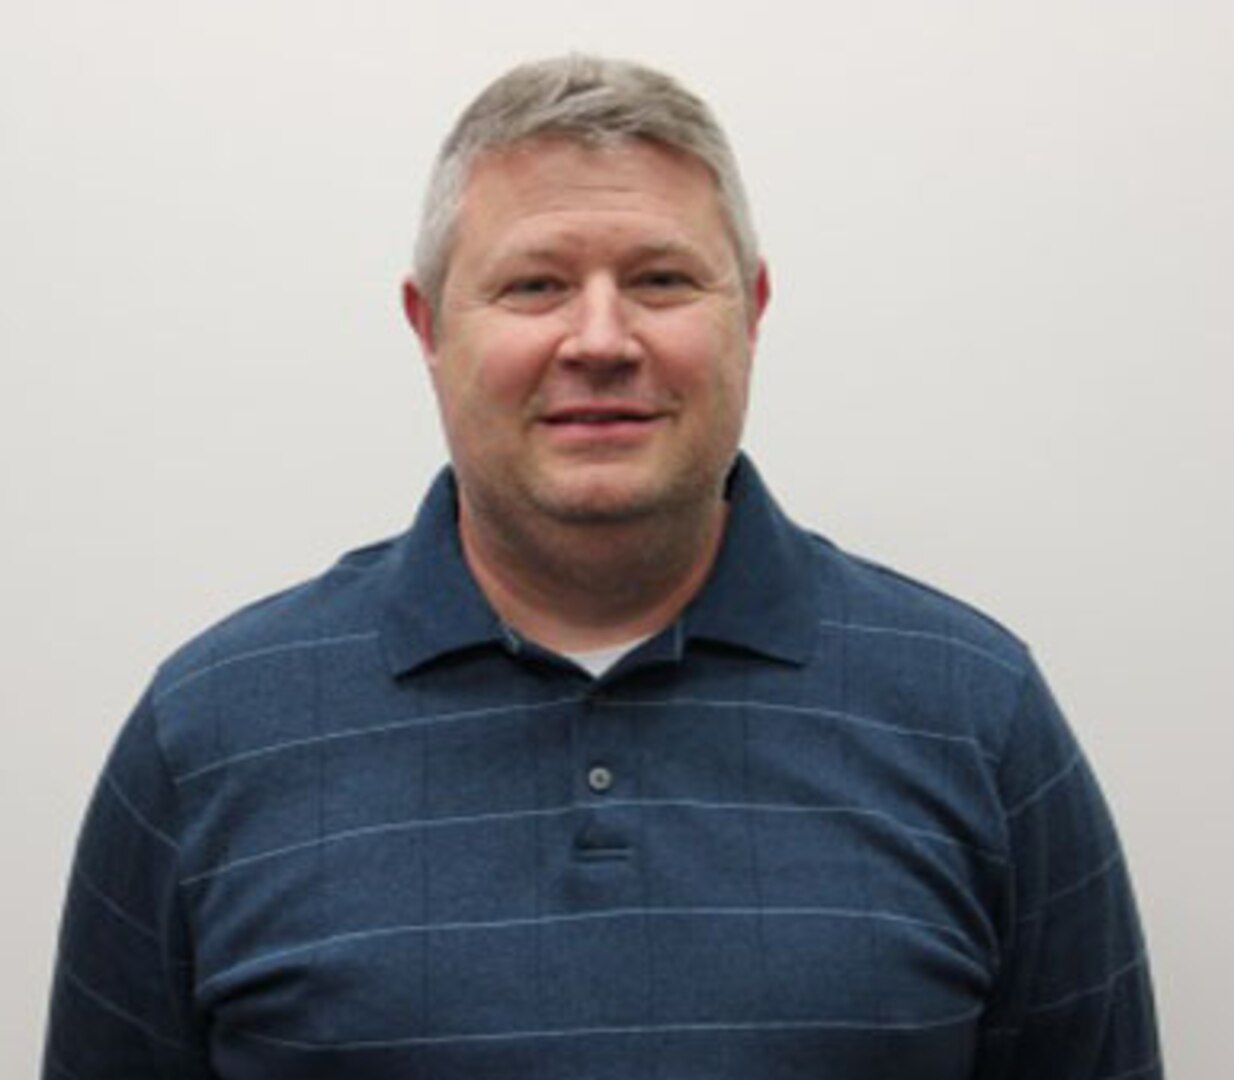 Paul Finn, supervisory supply technician at Distribution Susquehanna, Pa., has been chosen as the Employee of the Quarter for first quarter, fiscal year 2016 